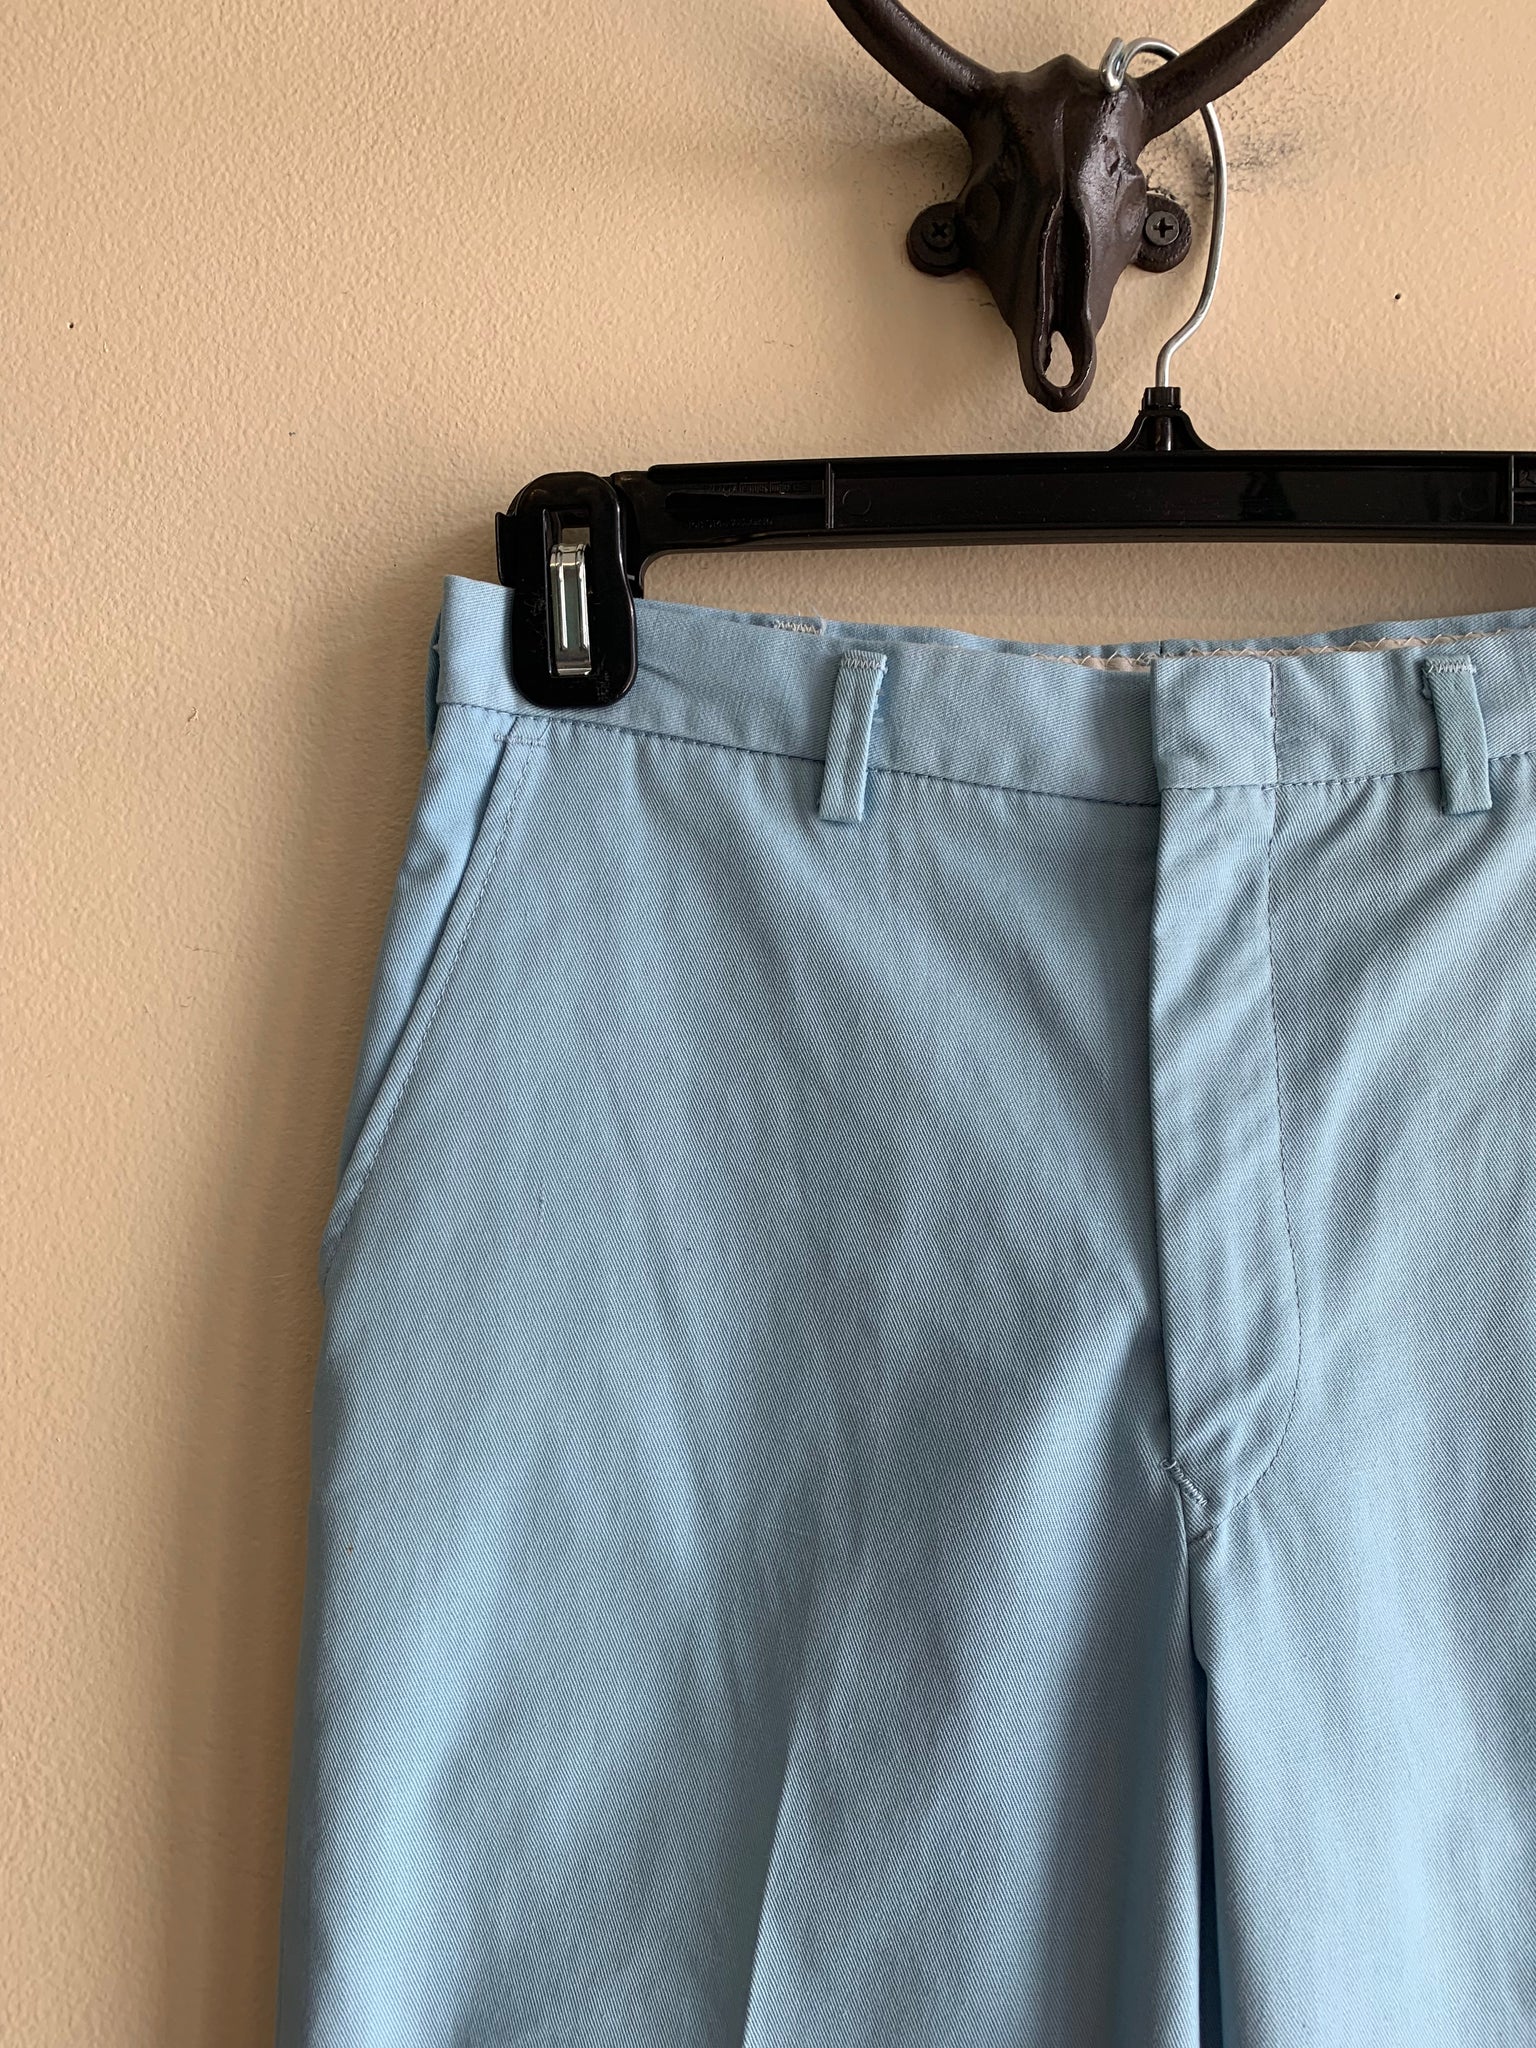 70s Light Blue GWG Trousers - S